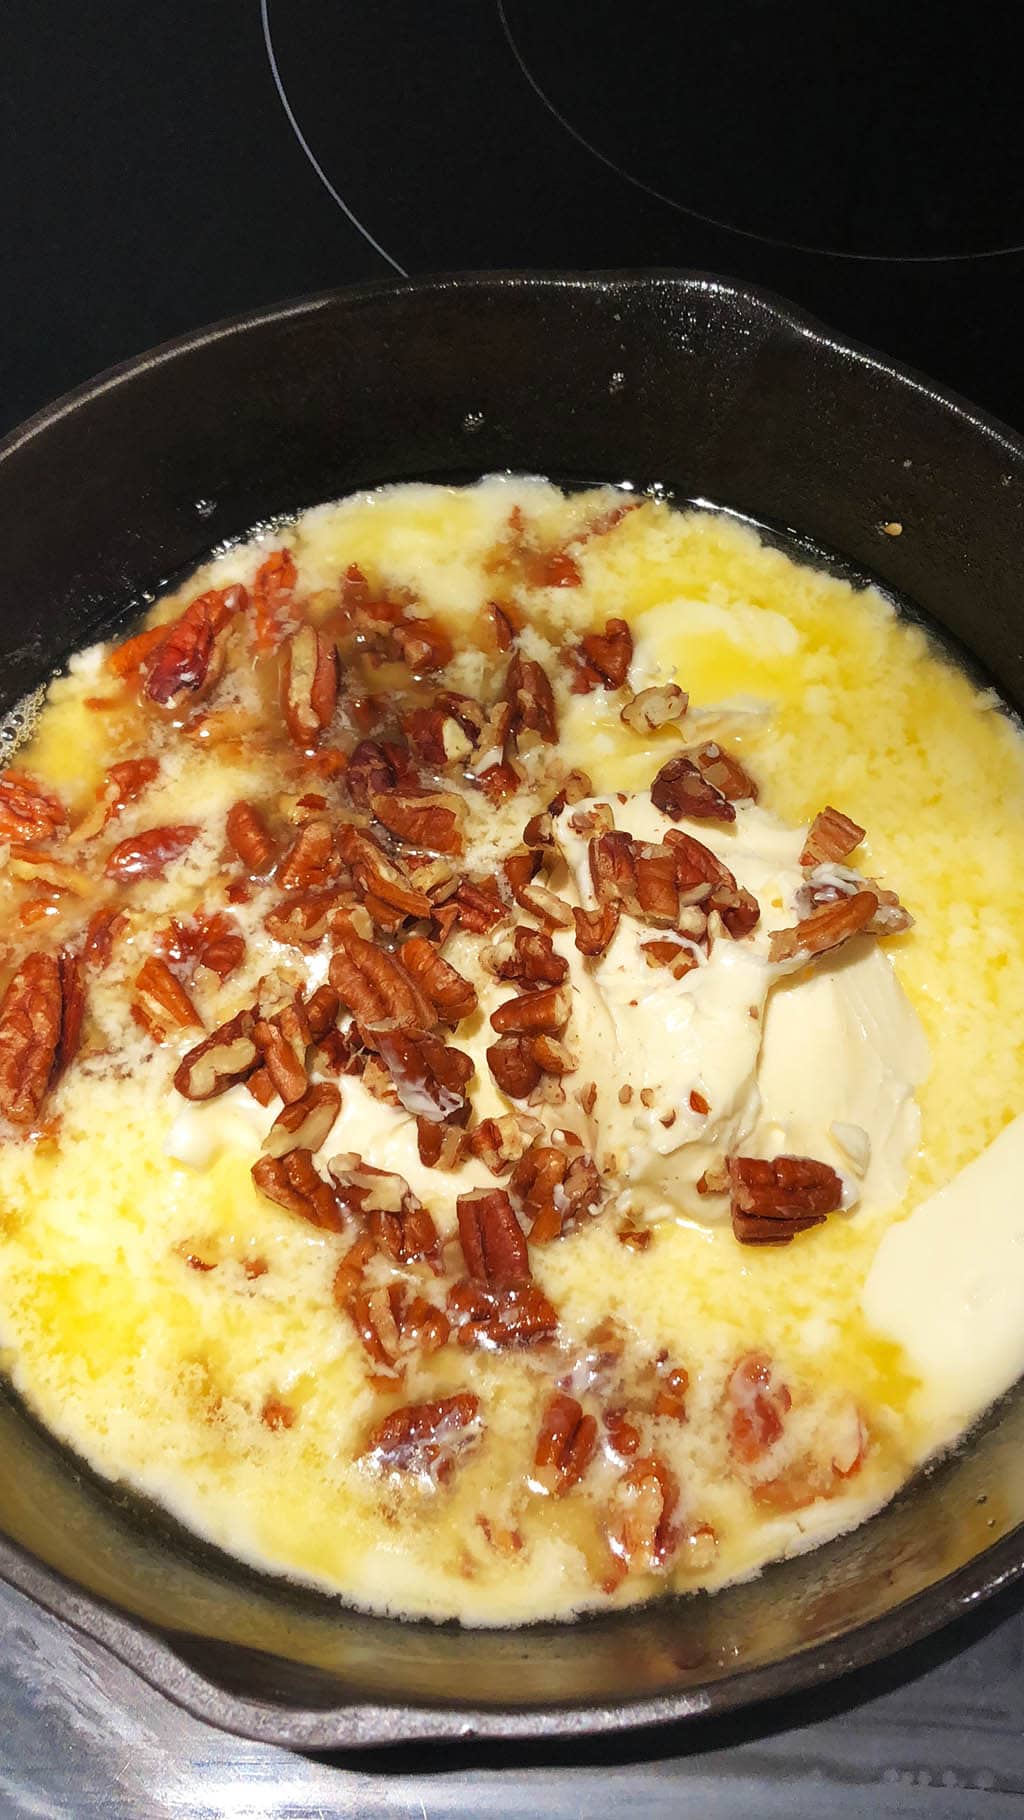 Melted margarine and pecans in a cast iron pan, making vegan brown butter